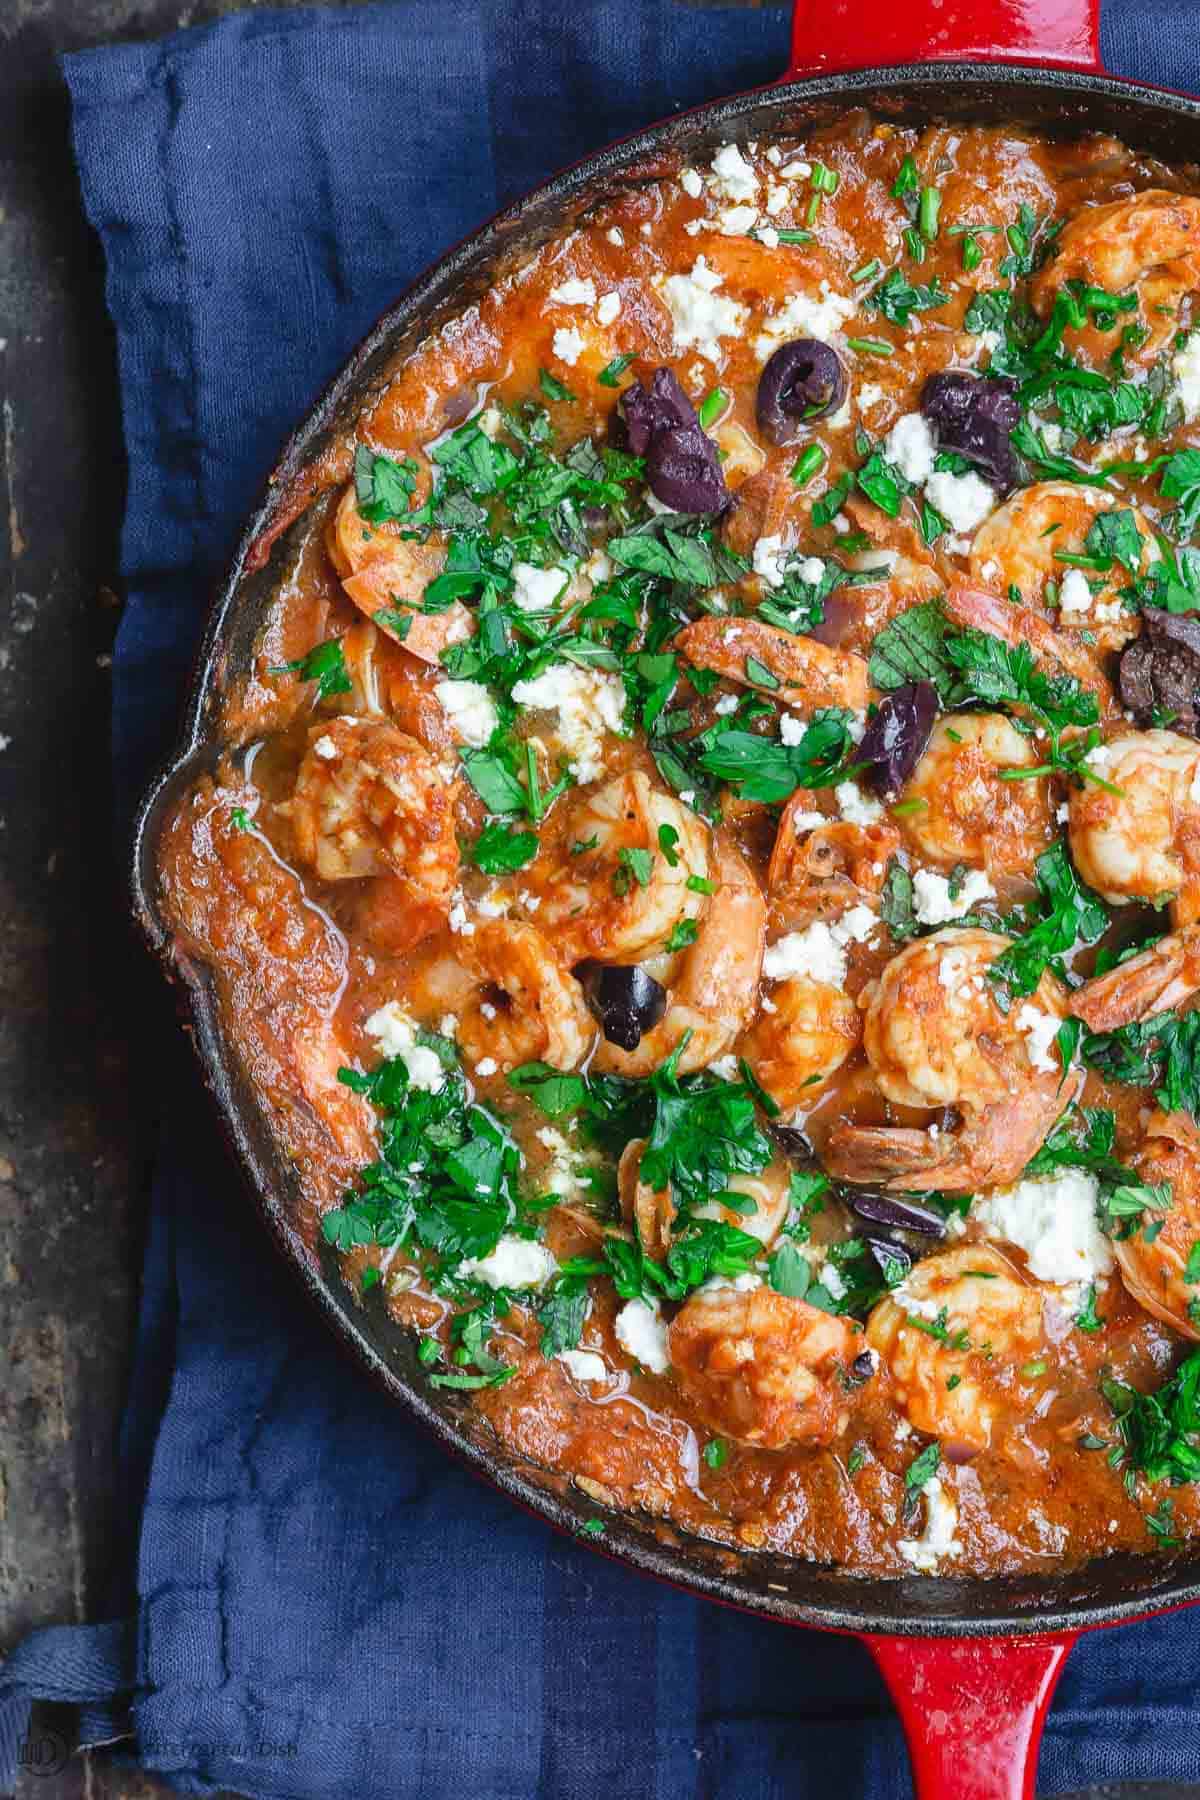 Greek shrimp in skillet, doused in tomato sauce and topped with chopped fresh herbs, crumbled feta cheese, and olives